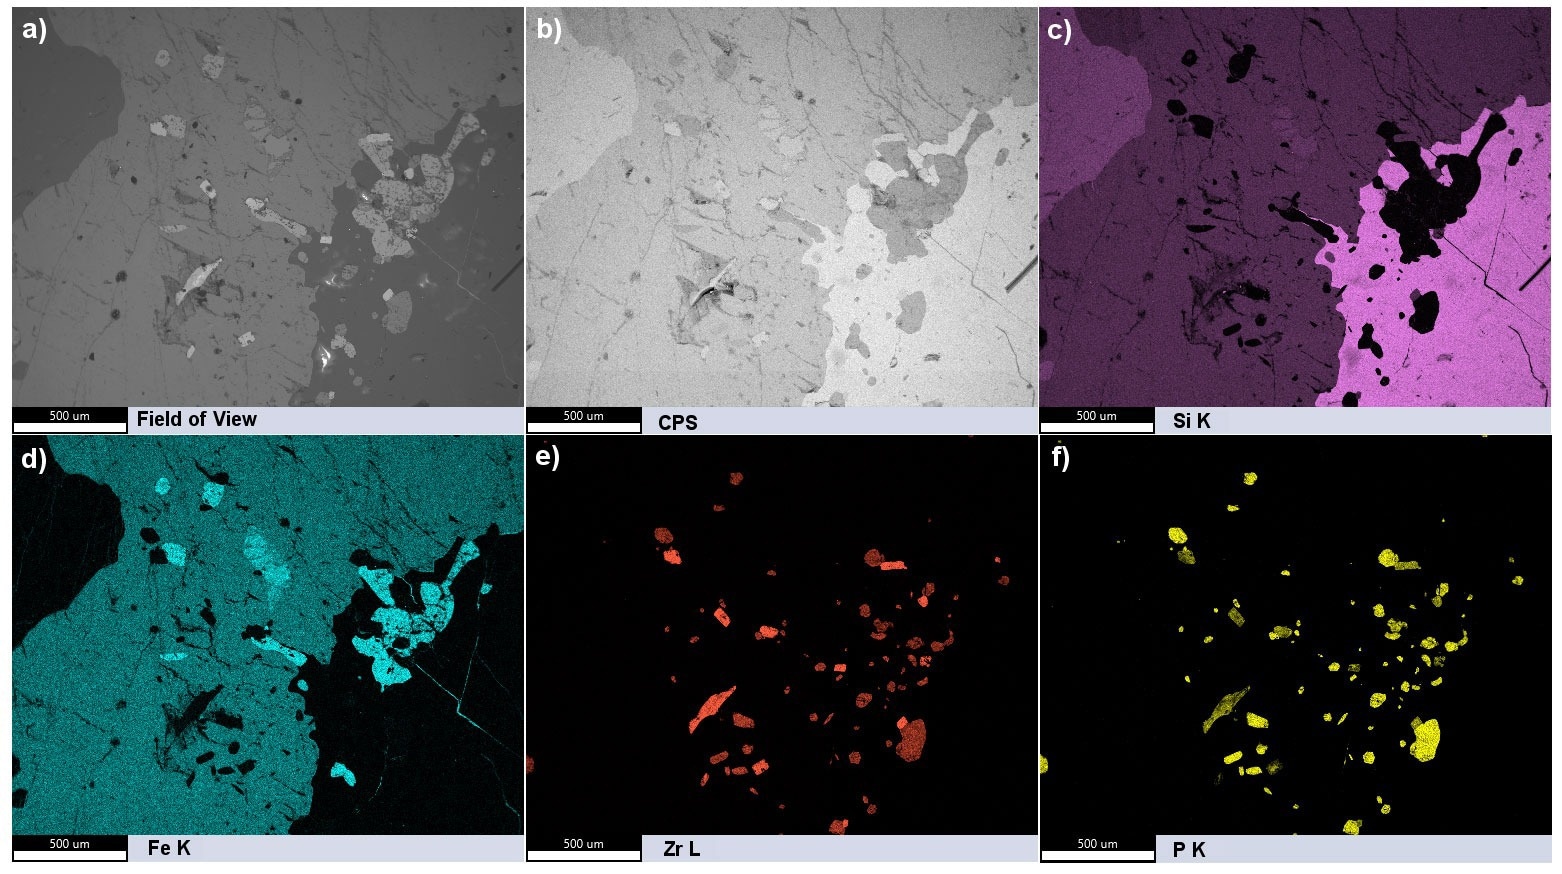 Overview of the dual detector data from a floor tile sample. An a) SEM image and b) summed CPS map of the field of view. c-f) Summed ROI maps of Si K, Fe K, Zr L, and P K, respectively.